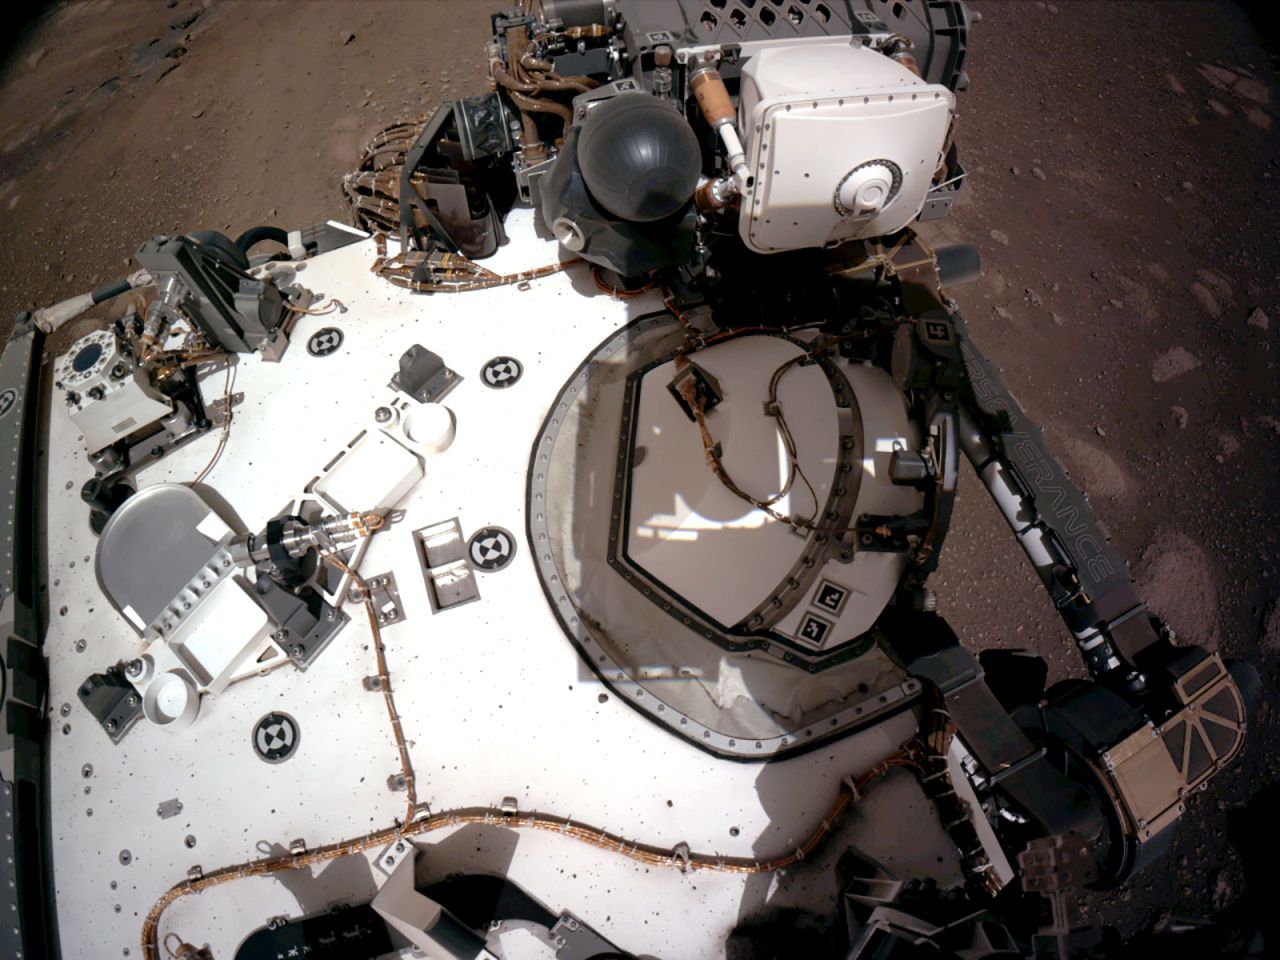 The navigation cameras aboard NASA's Perseverance rover captured this view of the rover's deck on February 20.